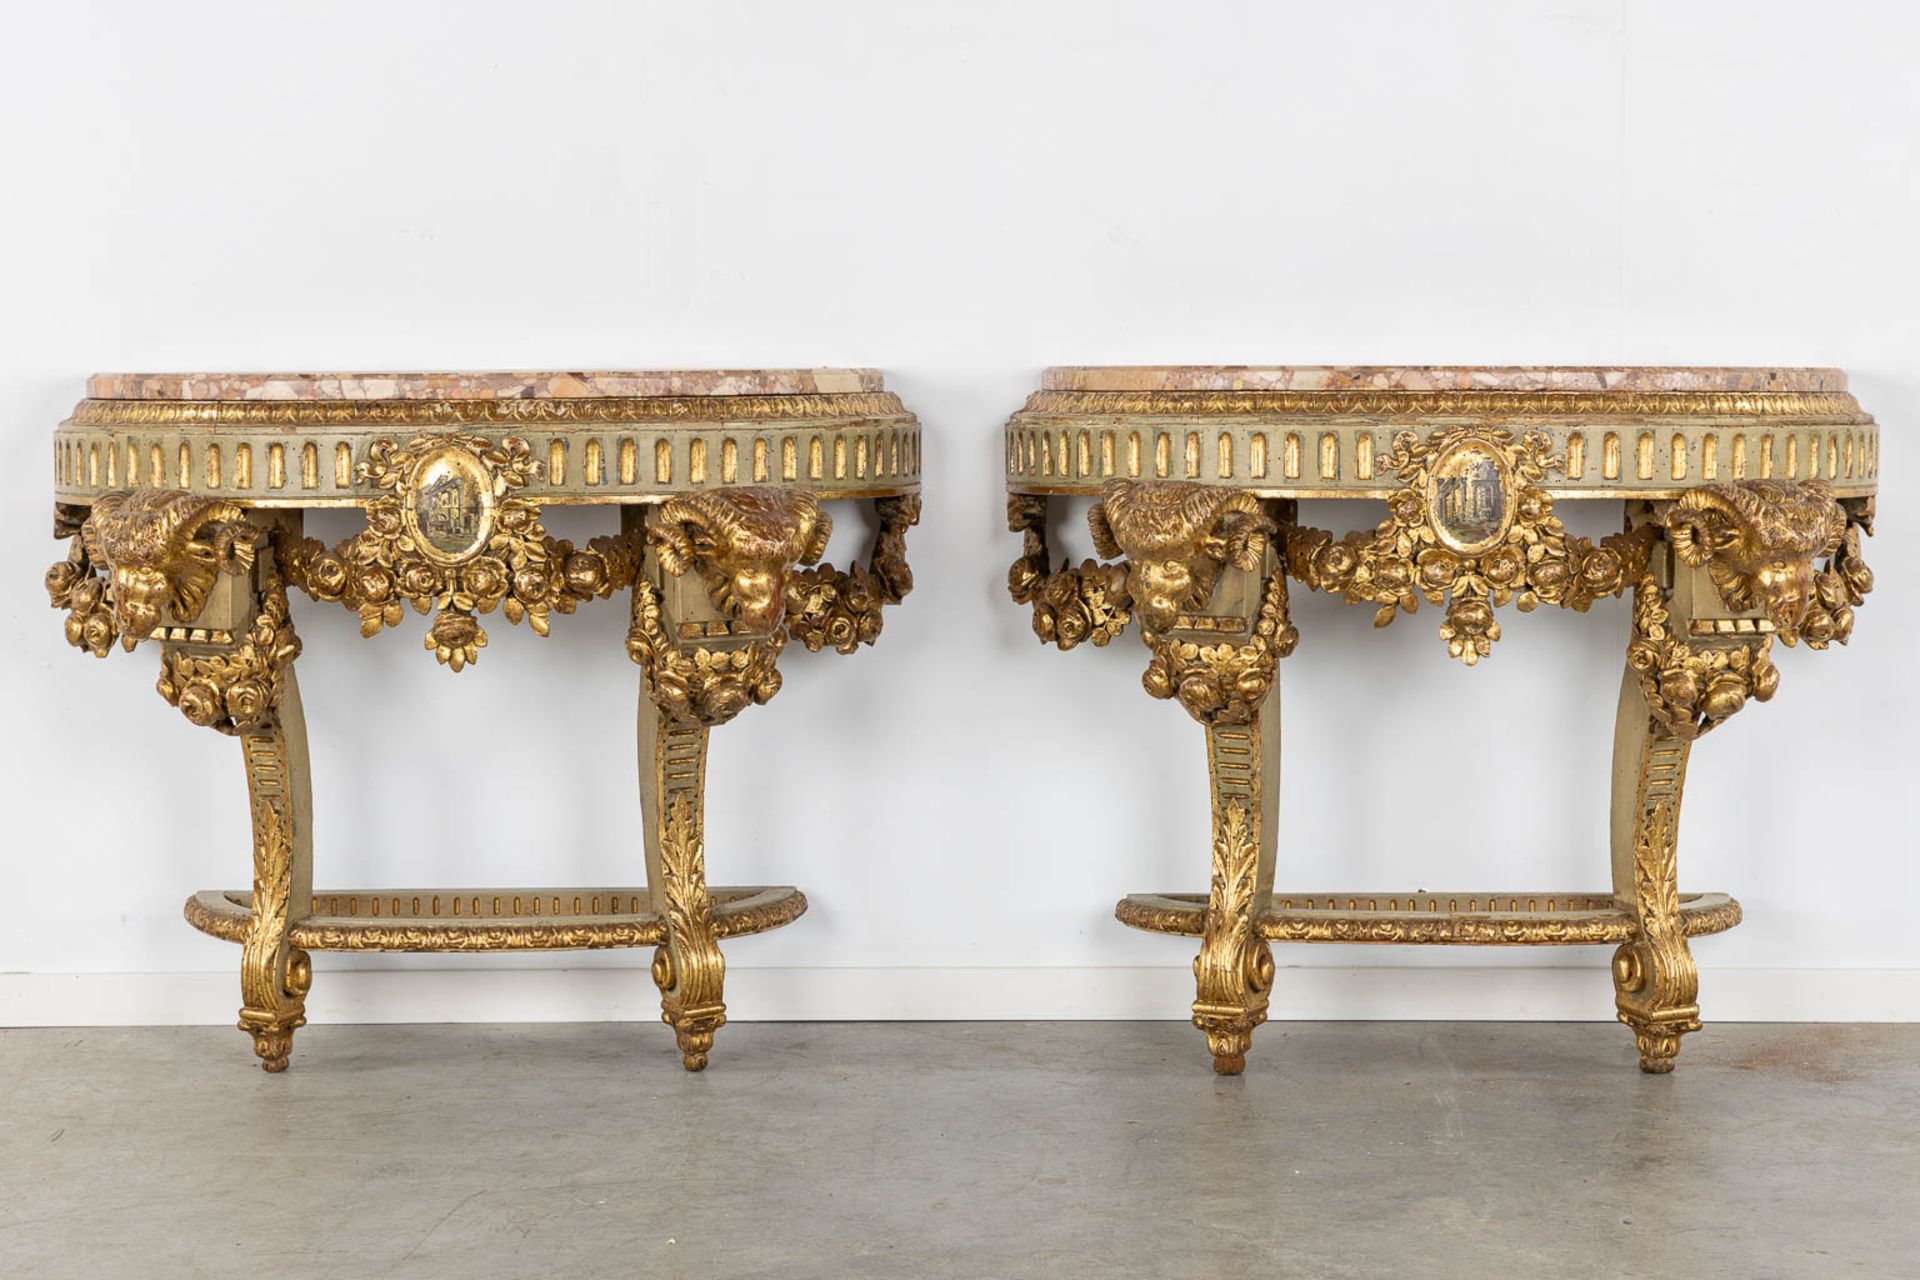 A pair of console tables with ram's heads, Louis XVI style, Italy, 19th C. (L:50 x W:110 x H:84 cm) - Image 3 of 10